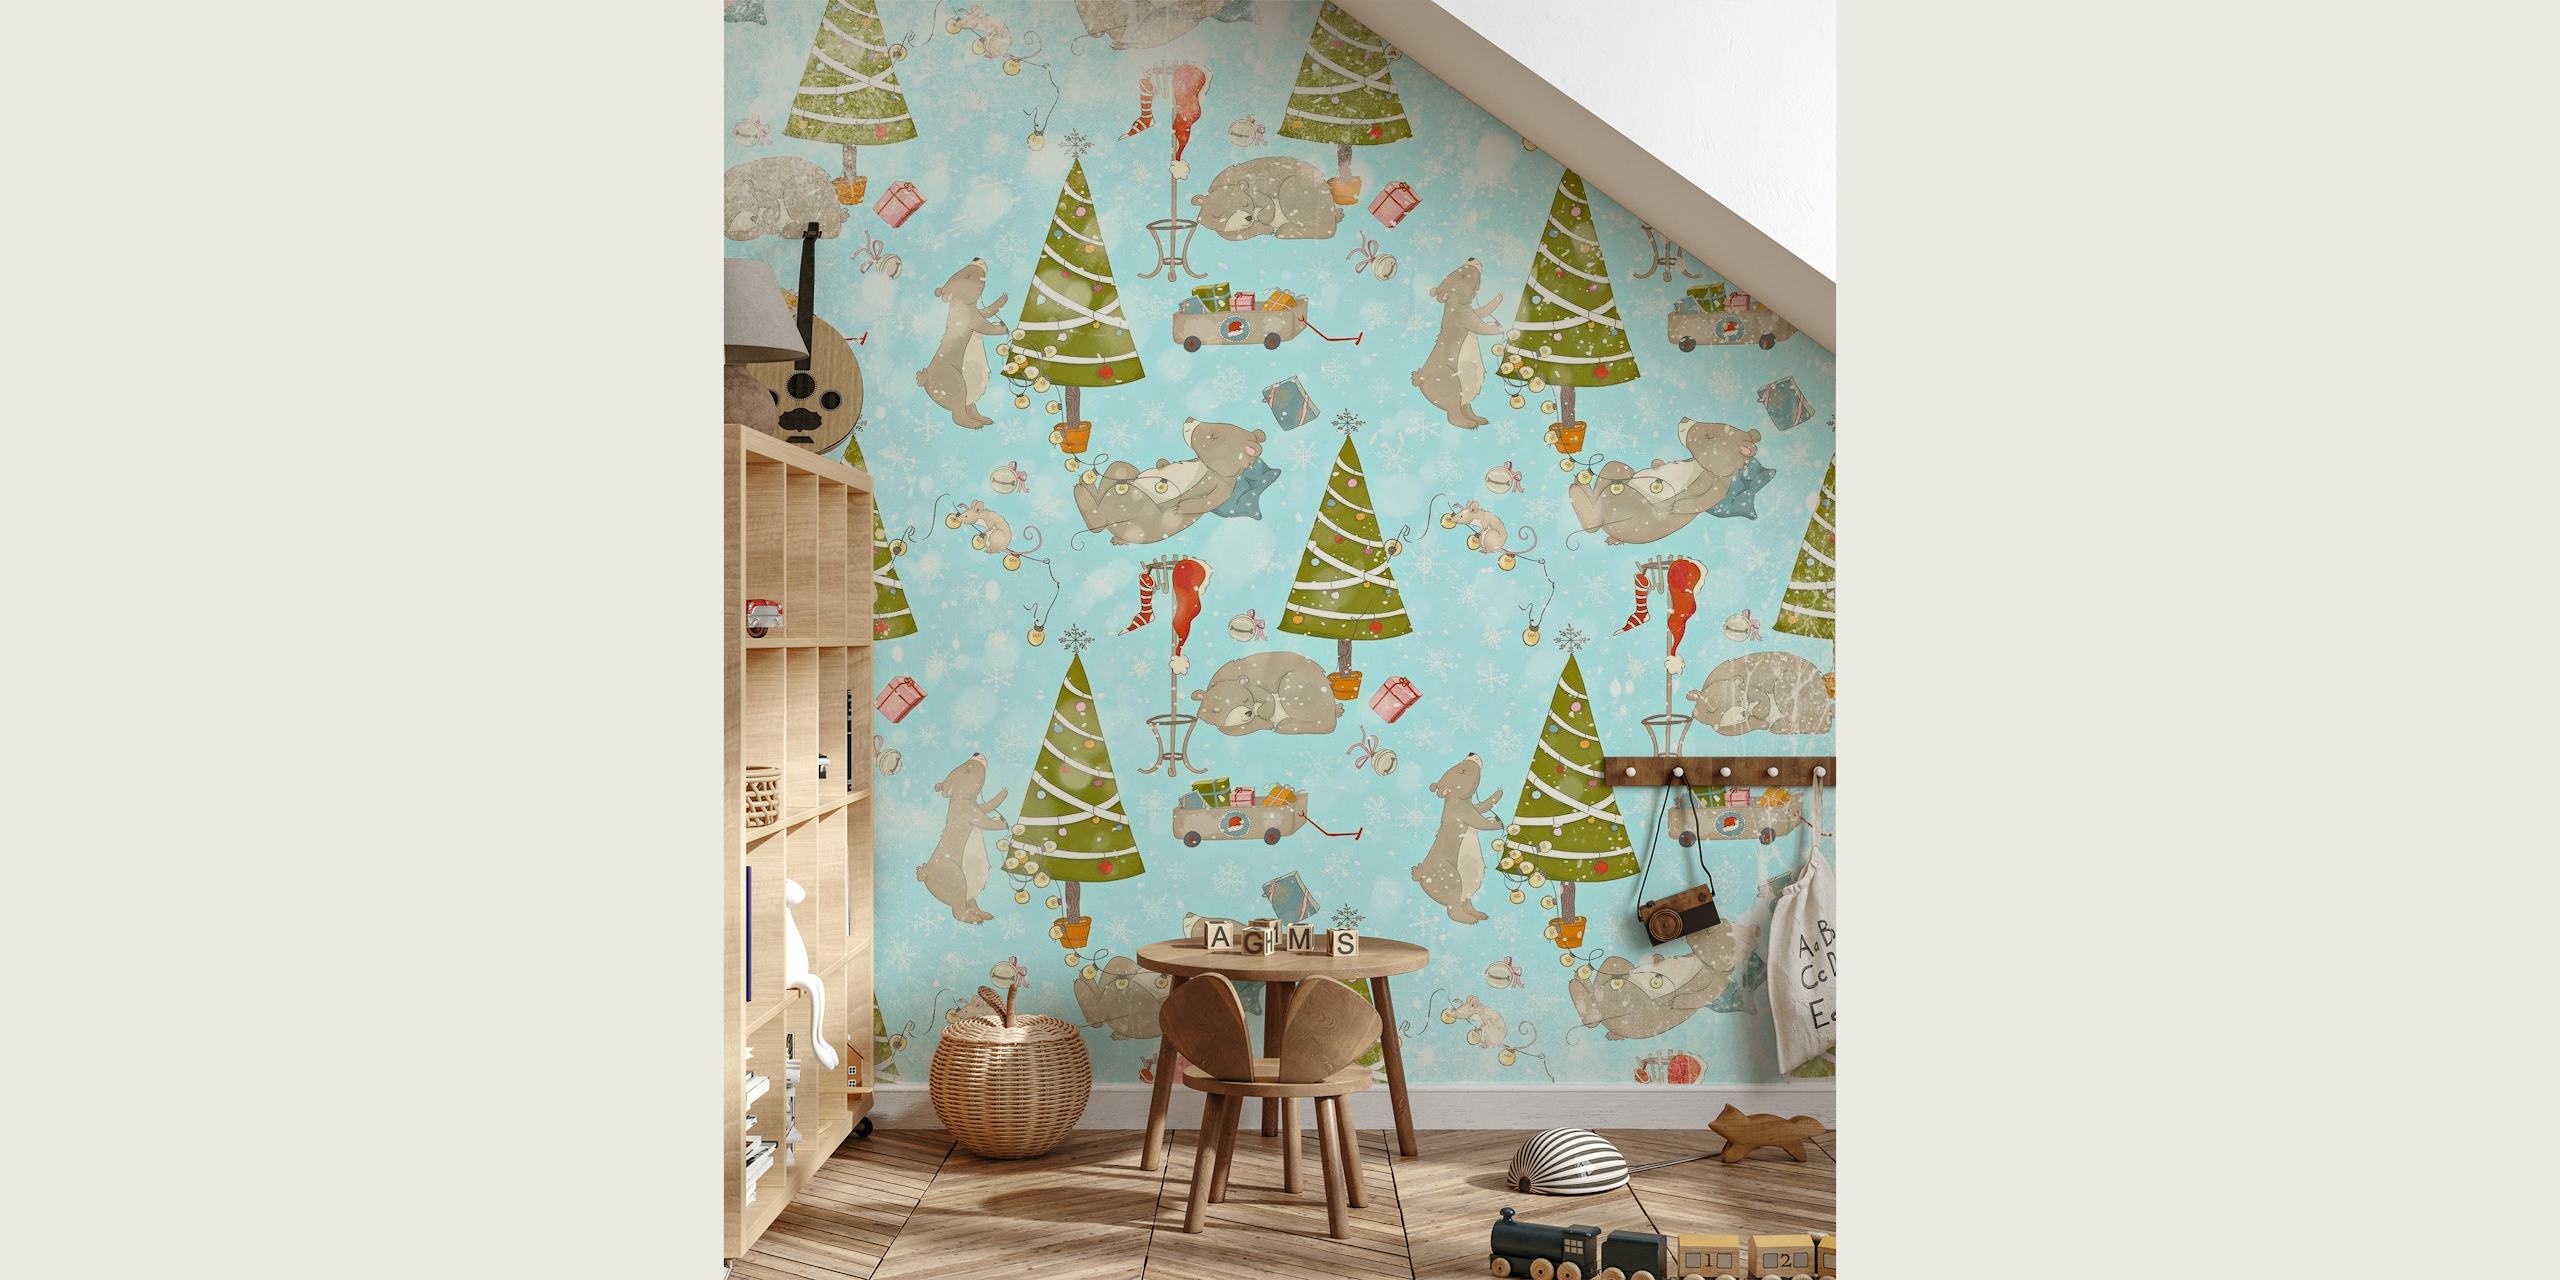 Decorationg the christmas tree wallpaper